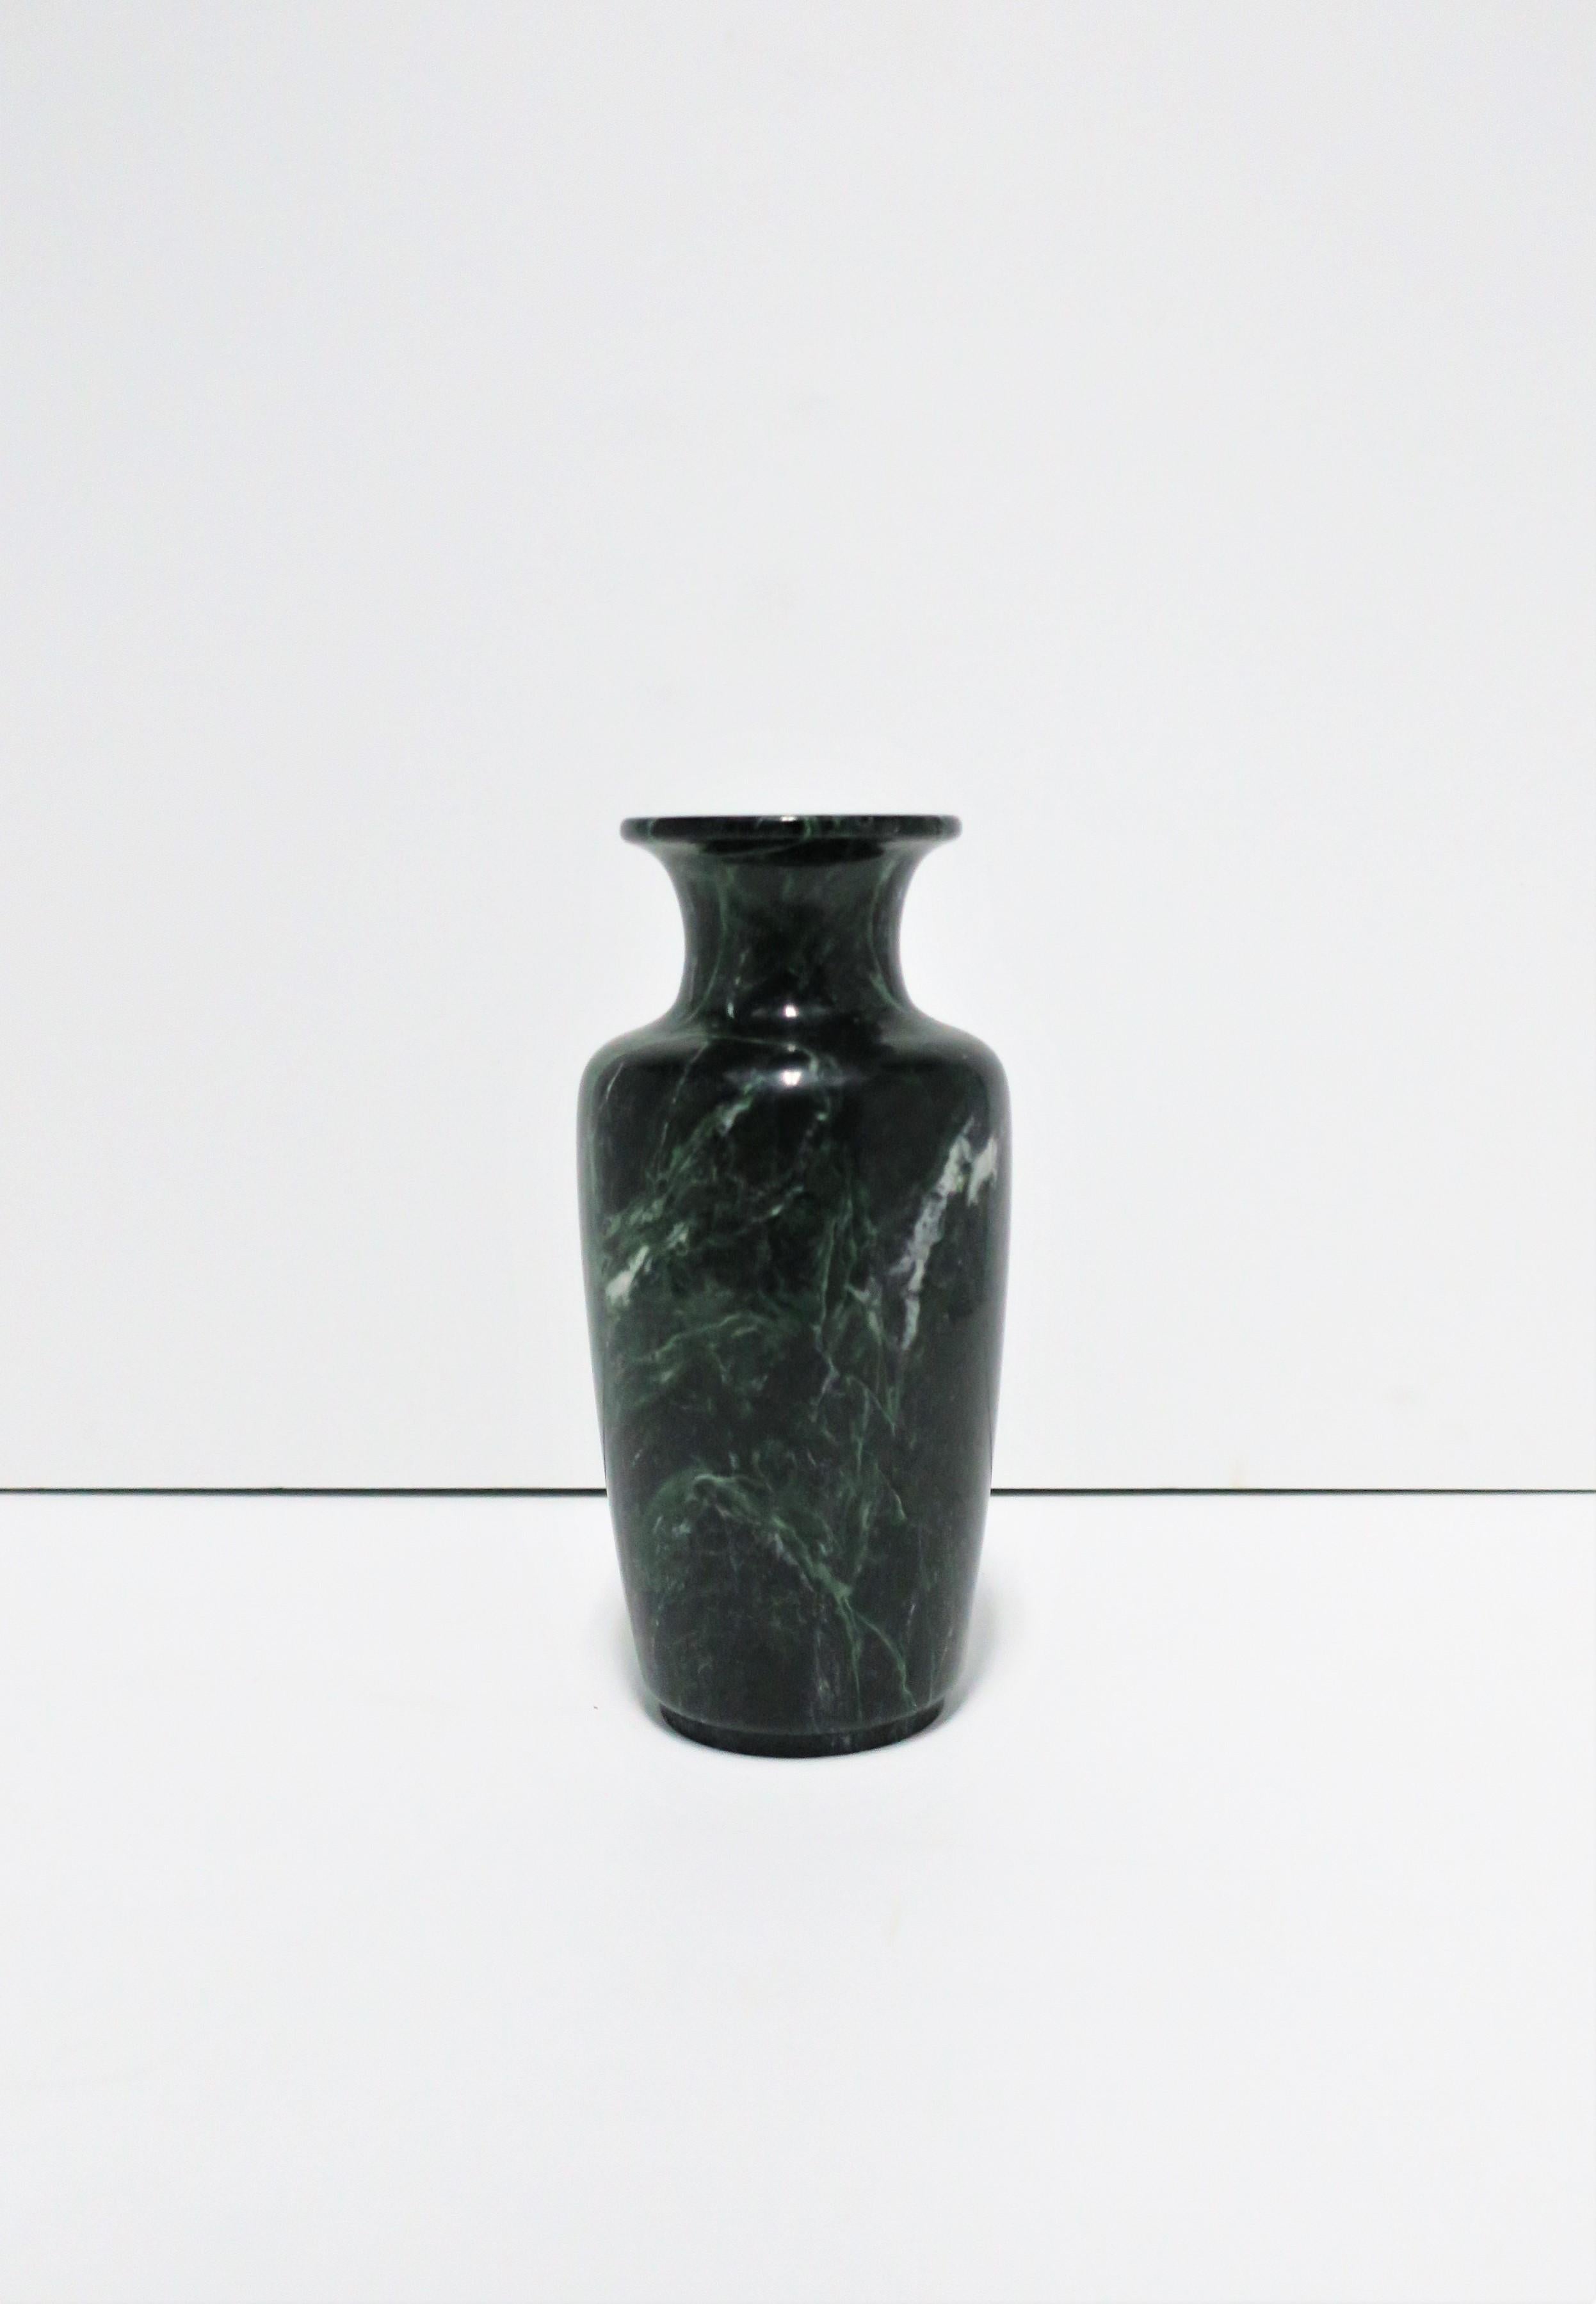 A substantial Postmodern or Modern style urn form dark green and white marble vase, circa 1970s or later, USA. With maker's mark on bottom of vase as show in image #14. Piece measures: 4